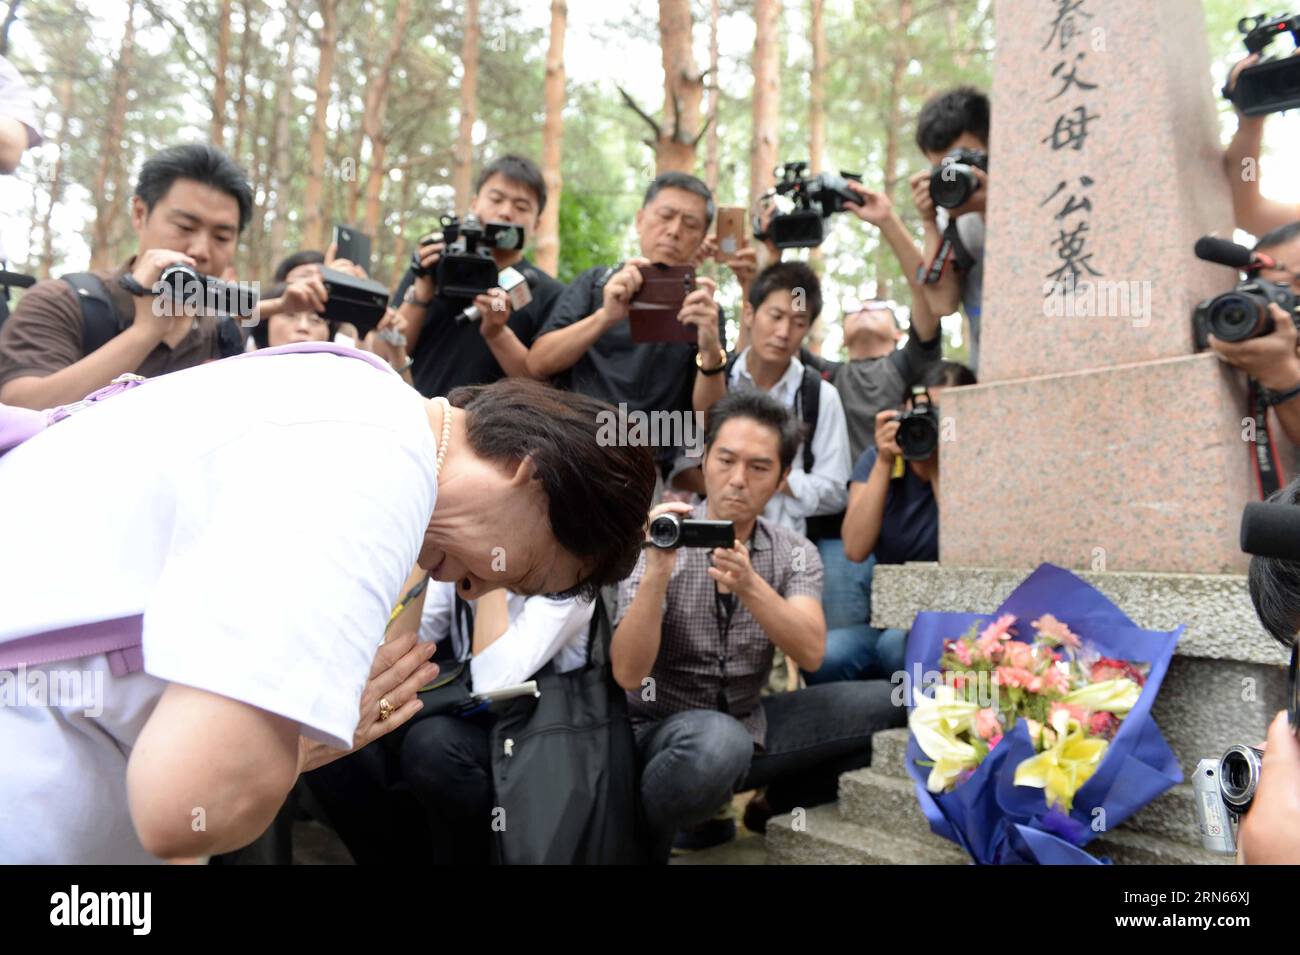 Ikeda Sumie, director general of a Tokyo support group for those Japanese returned from China, mourns for adoptive parents in front of a grave in a cemetery to memorize adoptive Chinese parents in Fangzheng County near Harbin, capital of northeast China s Heilongjiang Province, July 13, 2015. A group of 54 Japanese citizens, all now orphans, on Monday paid a visit to the graves of their adoptive Chinese parents here. Abandoned by their birth parents during the hasty retreat at the end of World War II in 1945, the orphans, now over 70 years old, were taken in and raised by the very Chinese resi Stock Photo